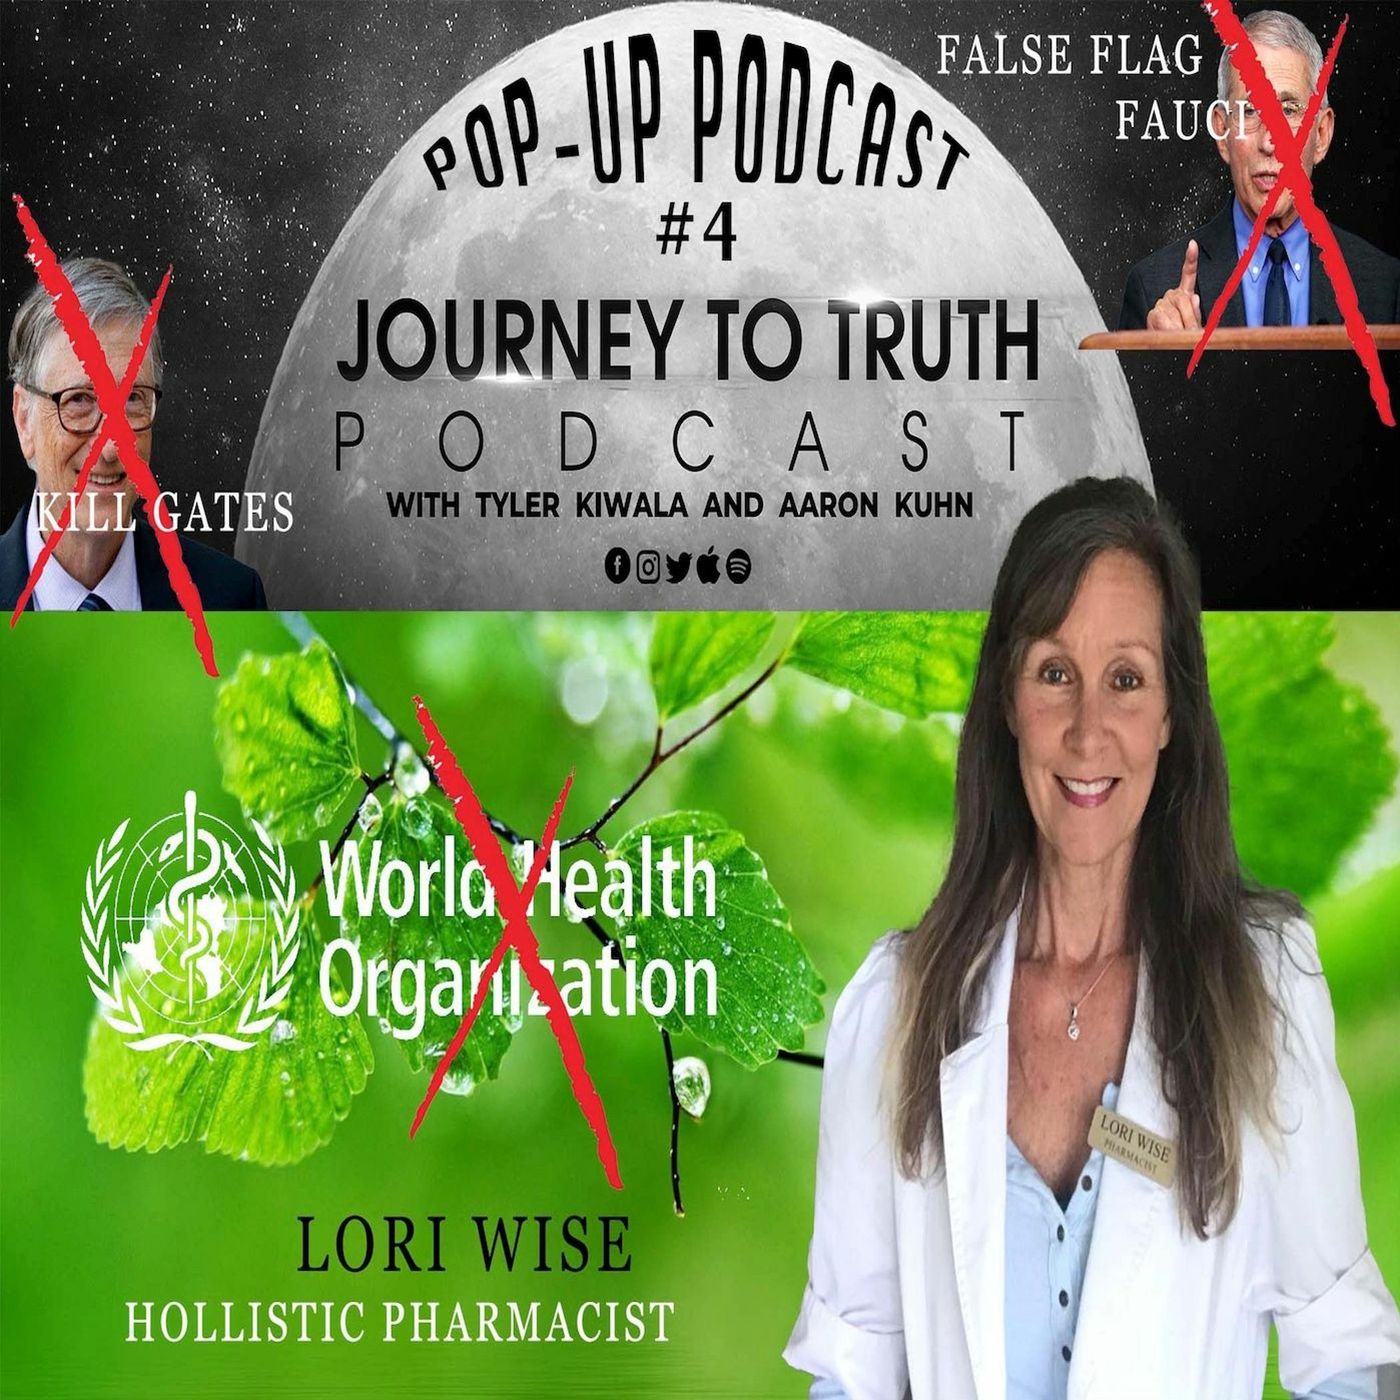 POP-UP PODCAST 4 - Lori Wise - False Flag Fauci - Kill Gates - Defunding WHOville - Dangers Of Masks